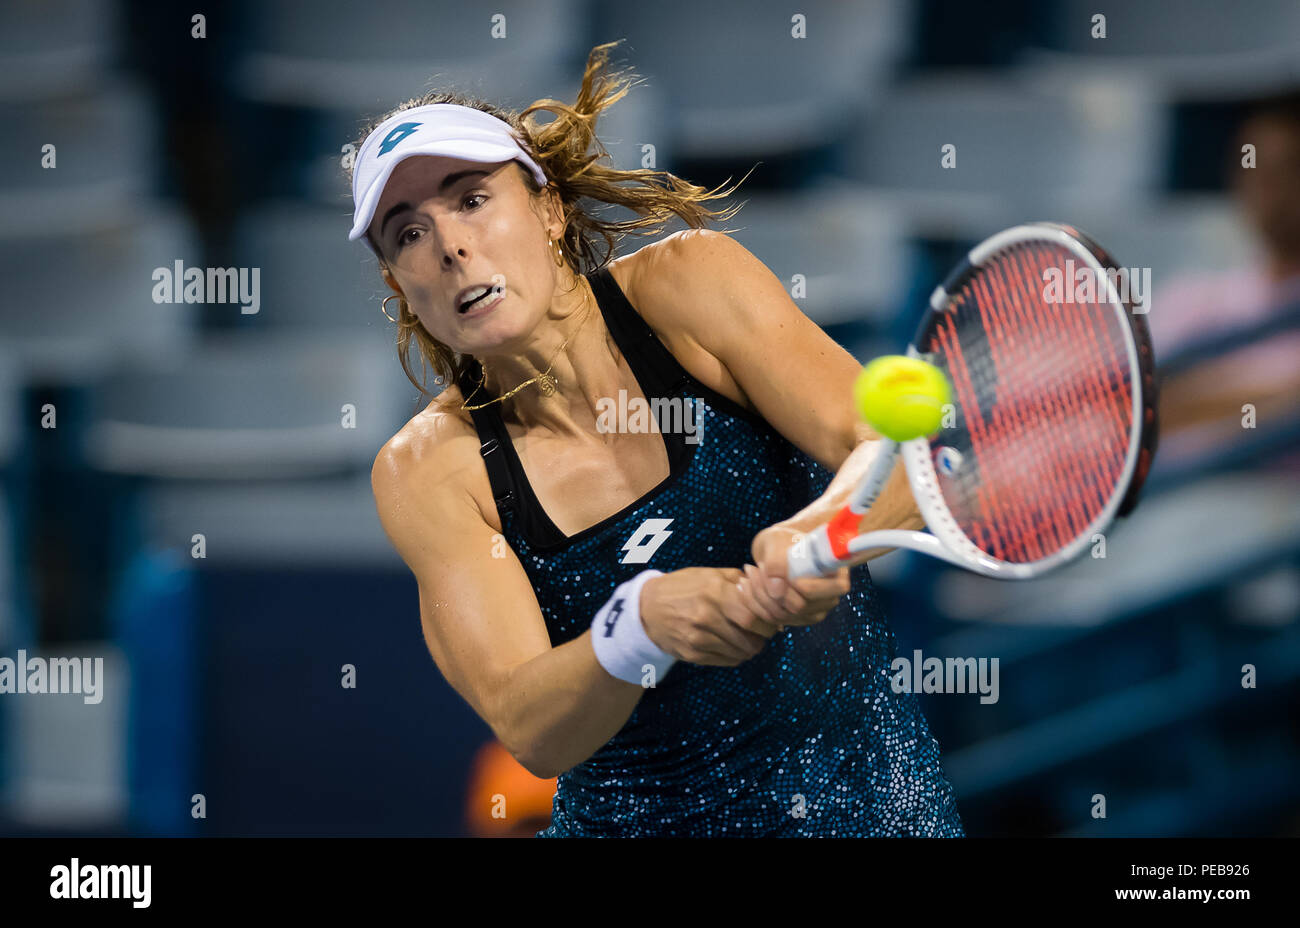 Cincinnati, OH, USA. 13th Aug, 2018. Alize Cornet of France in action  during her first-round match at the 2018 Western & Southern Open WTA  Premier 5 tennis tournament. Cincinnati, Ohio, USA, August